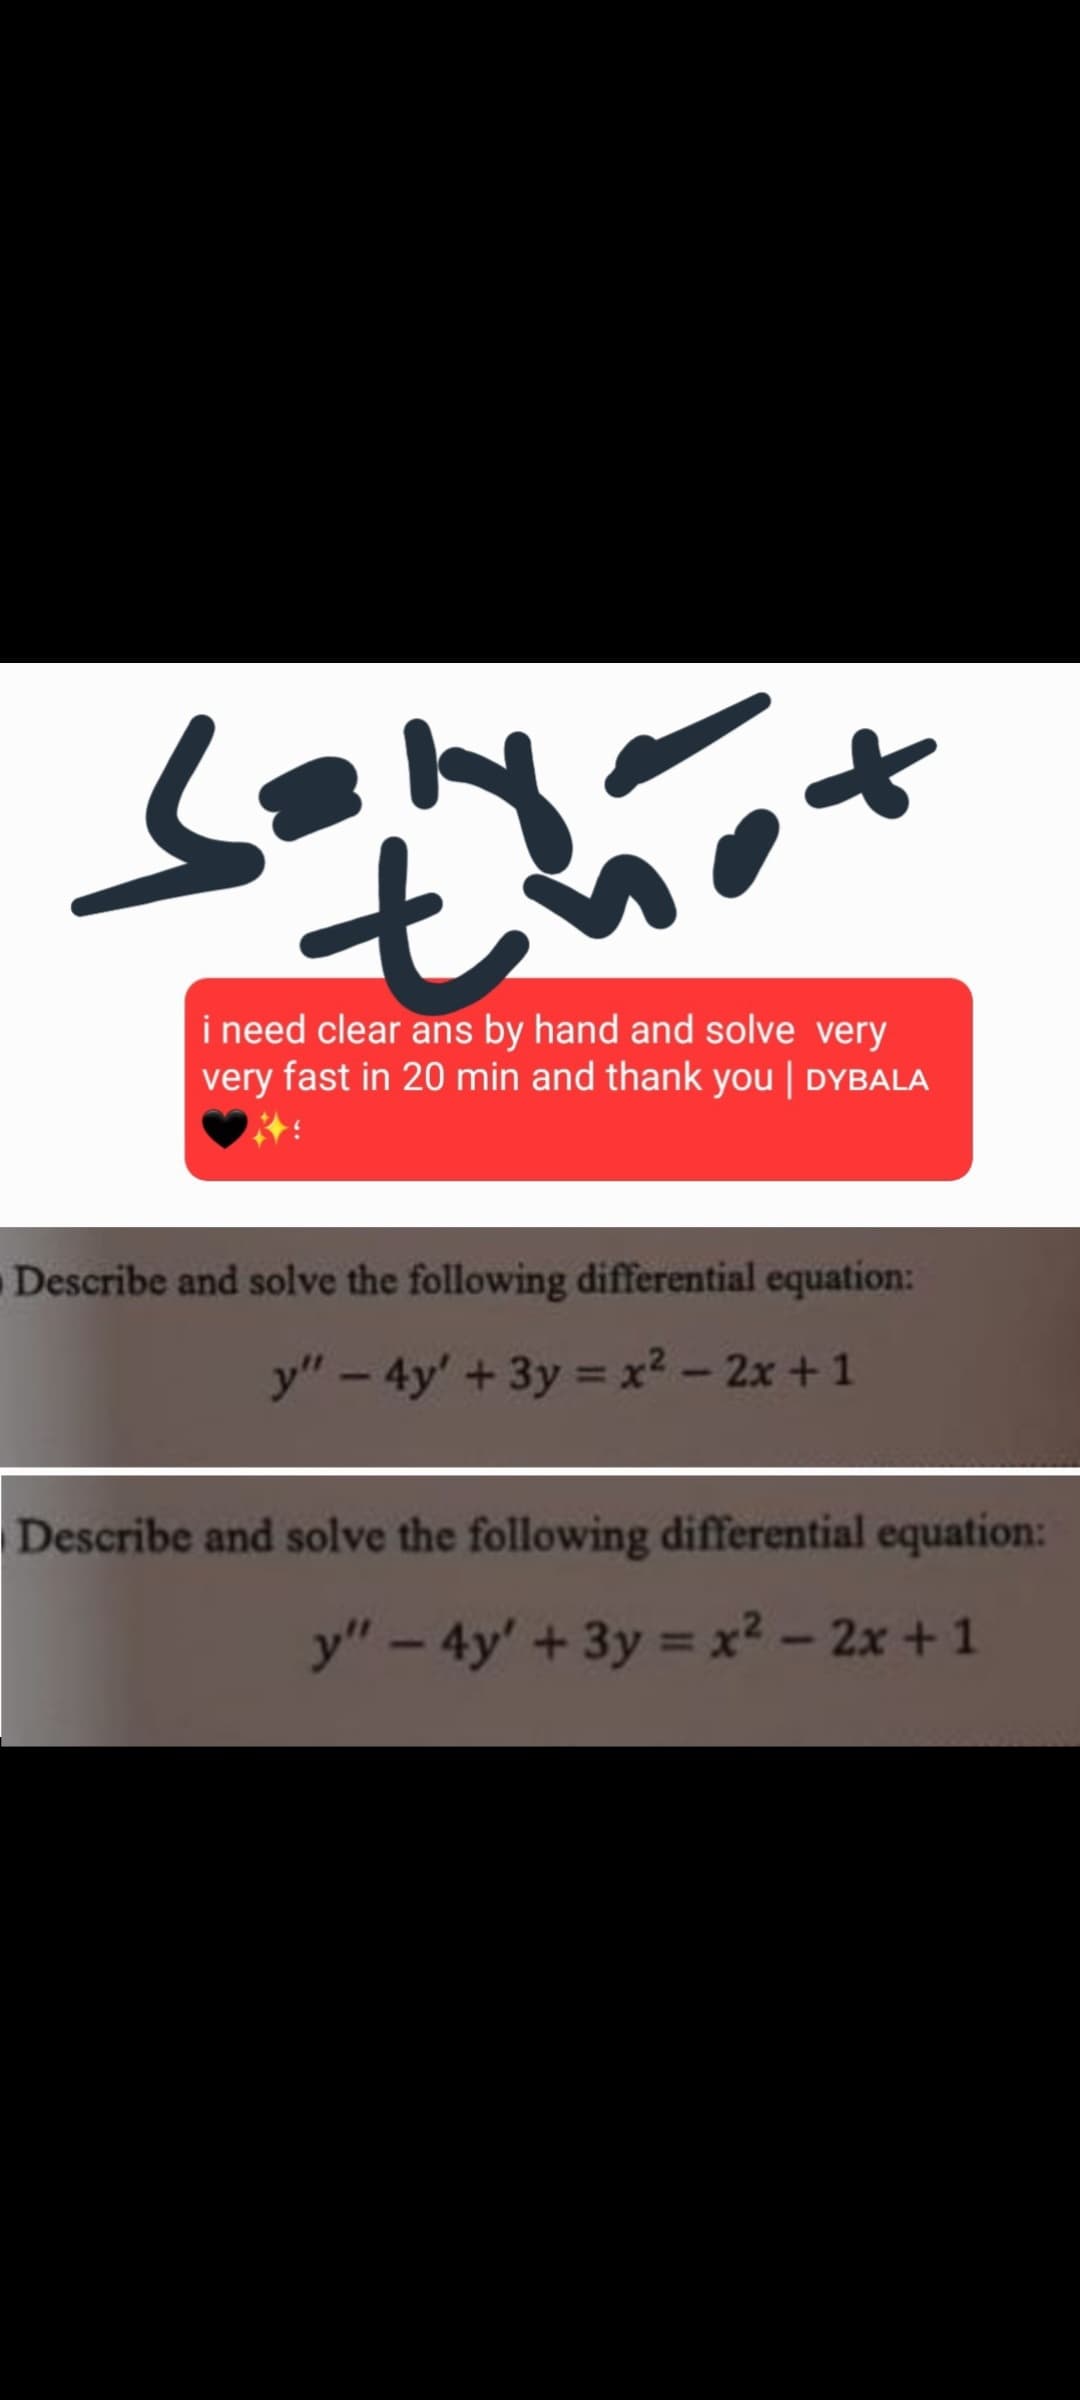 Son not
i need clear ans by hand and solve very
very fast in 20 min and thank you | DYBALA
Describe and solve the following differential equation:
y"-4y' + 3y = x²-2x+1
Describe and solve the following differential equation:
y"-4y' + 3y = x²-2x+1